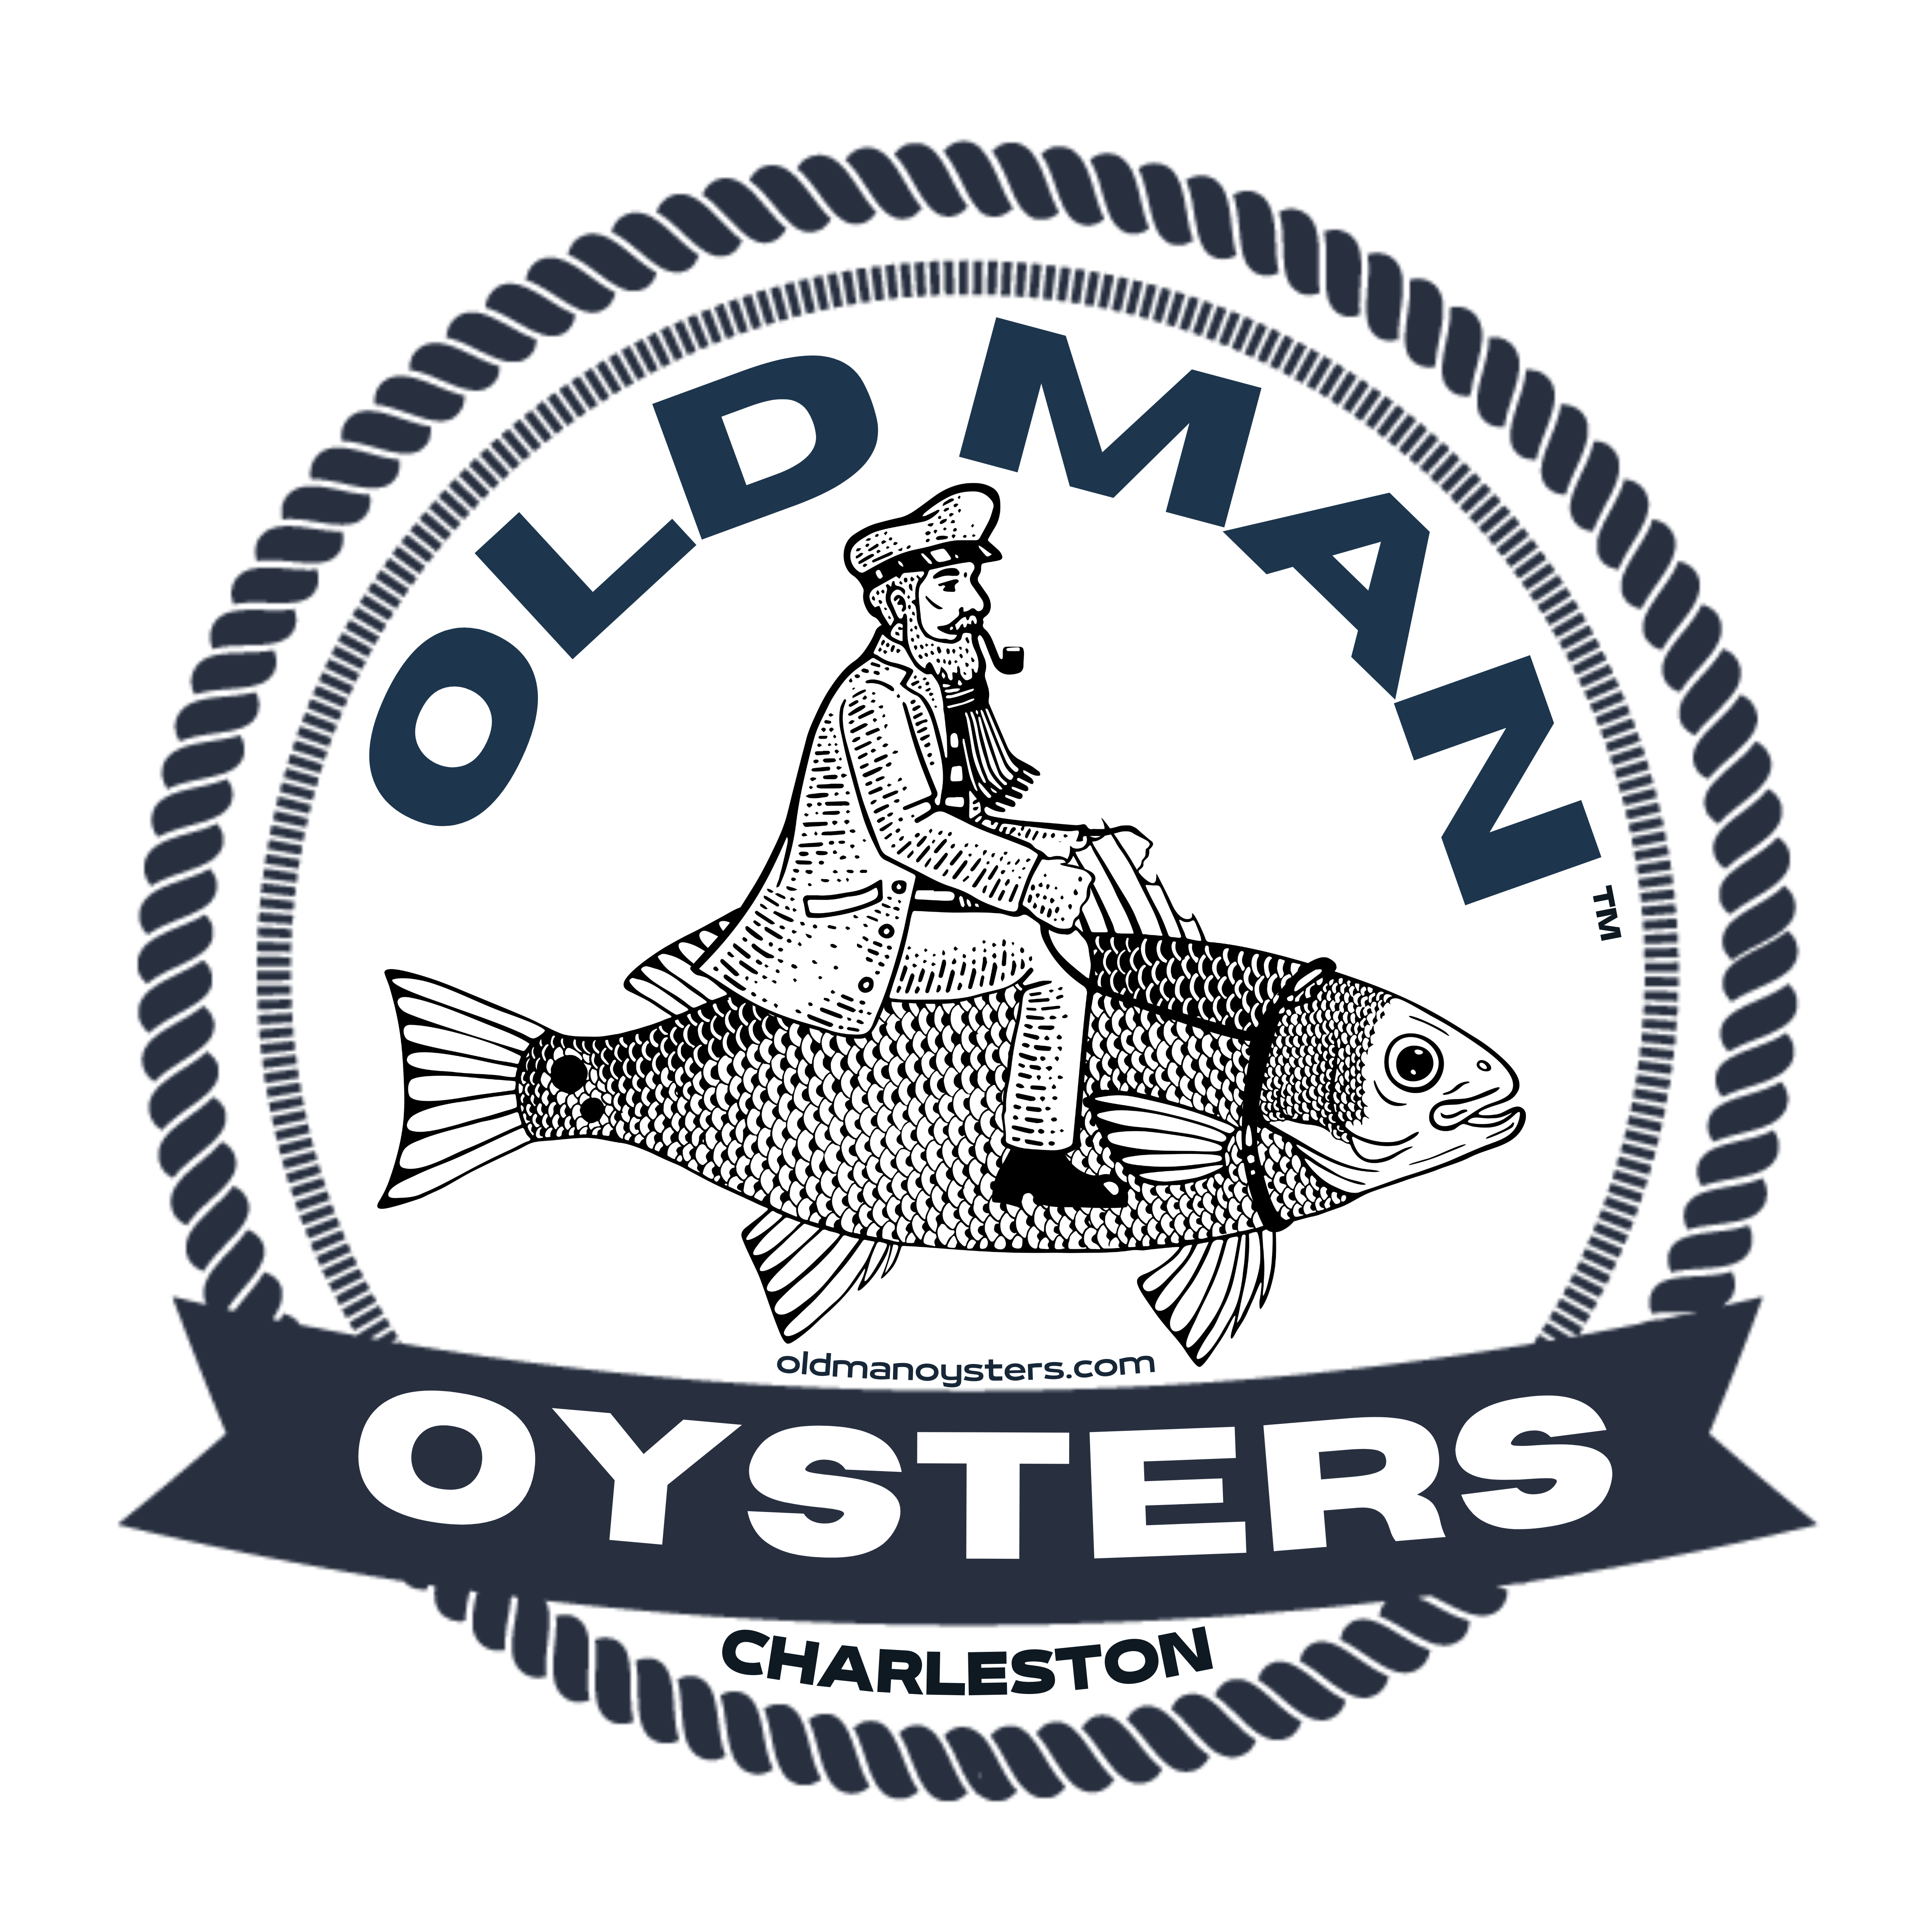 Old Man Oysters a WillisElgin Company